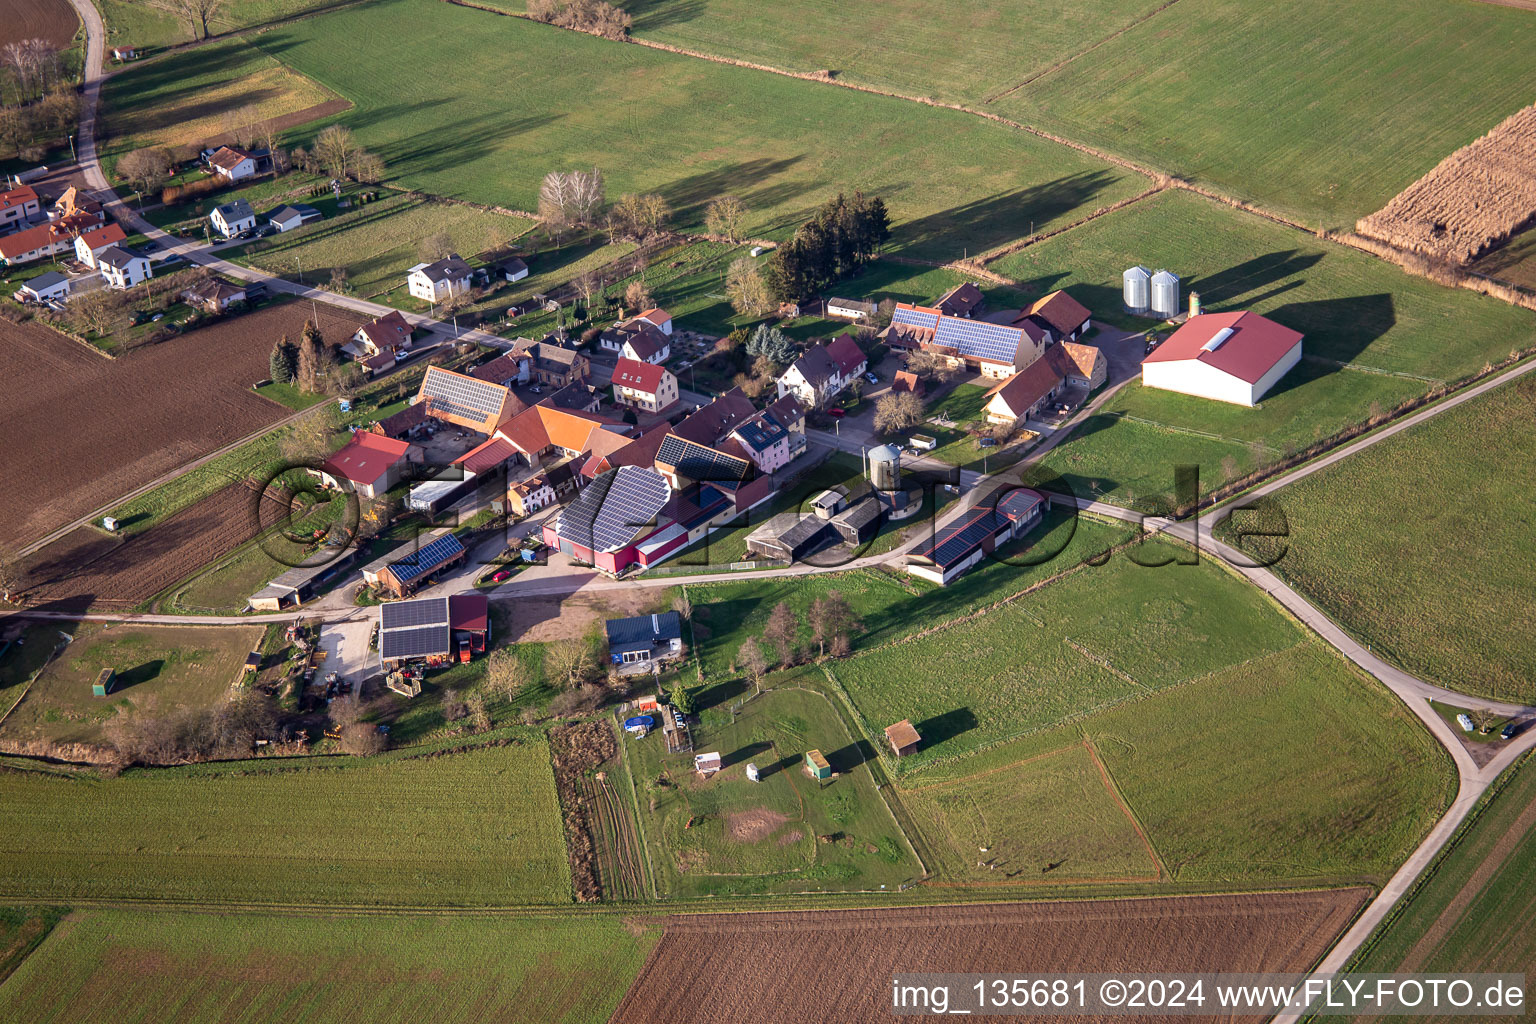 Aerial view of Solar rotating roof of the Schowalter winery in the district Deutschhof in Kapellen-Drusweiler in the state Rhineland-Palatinate, Germany